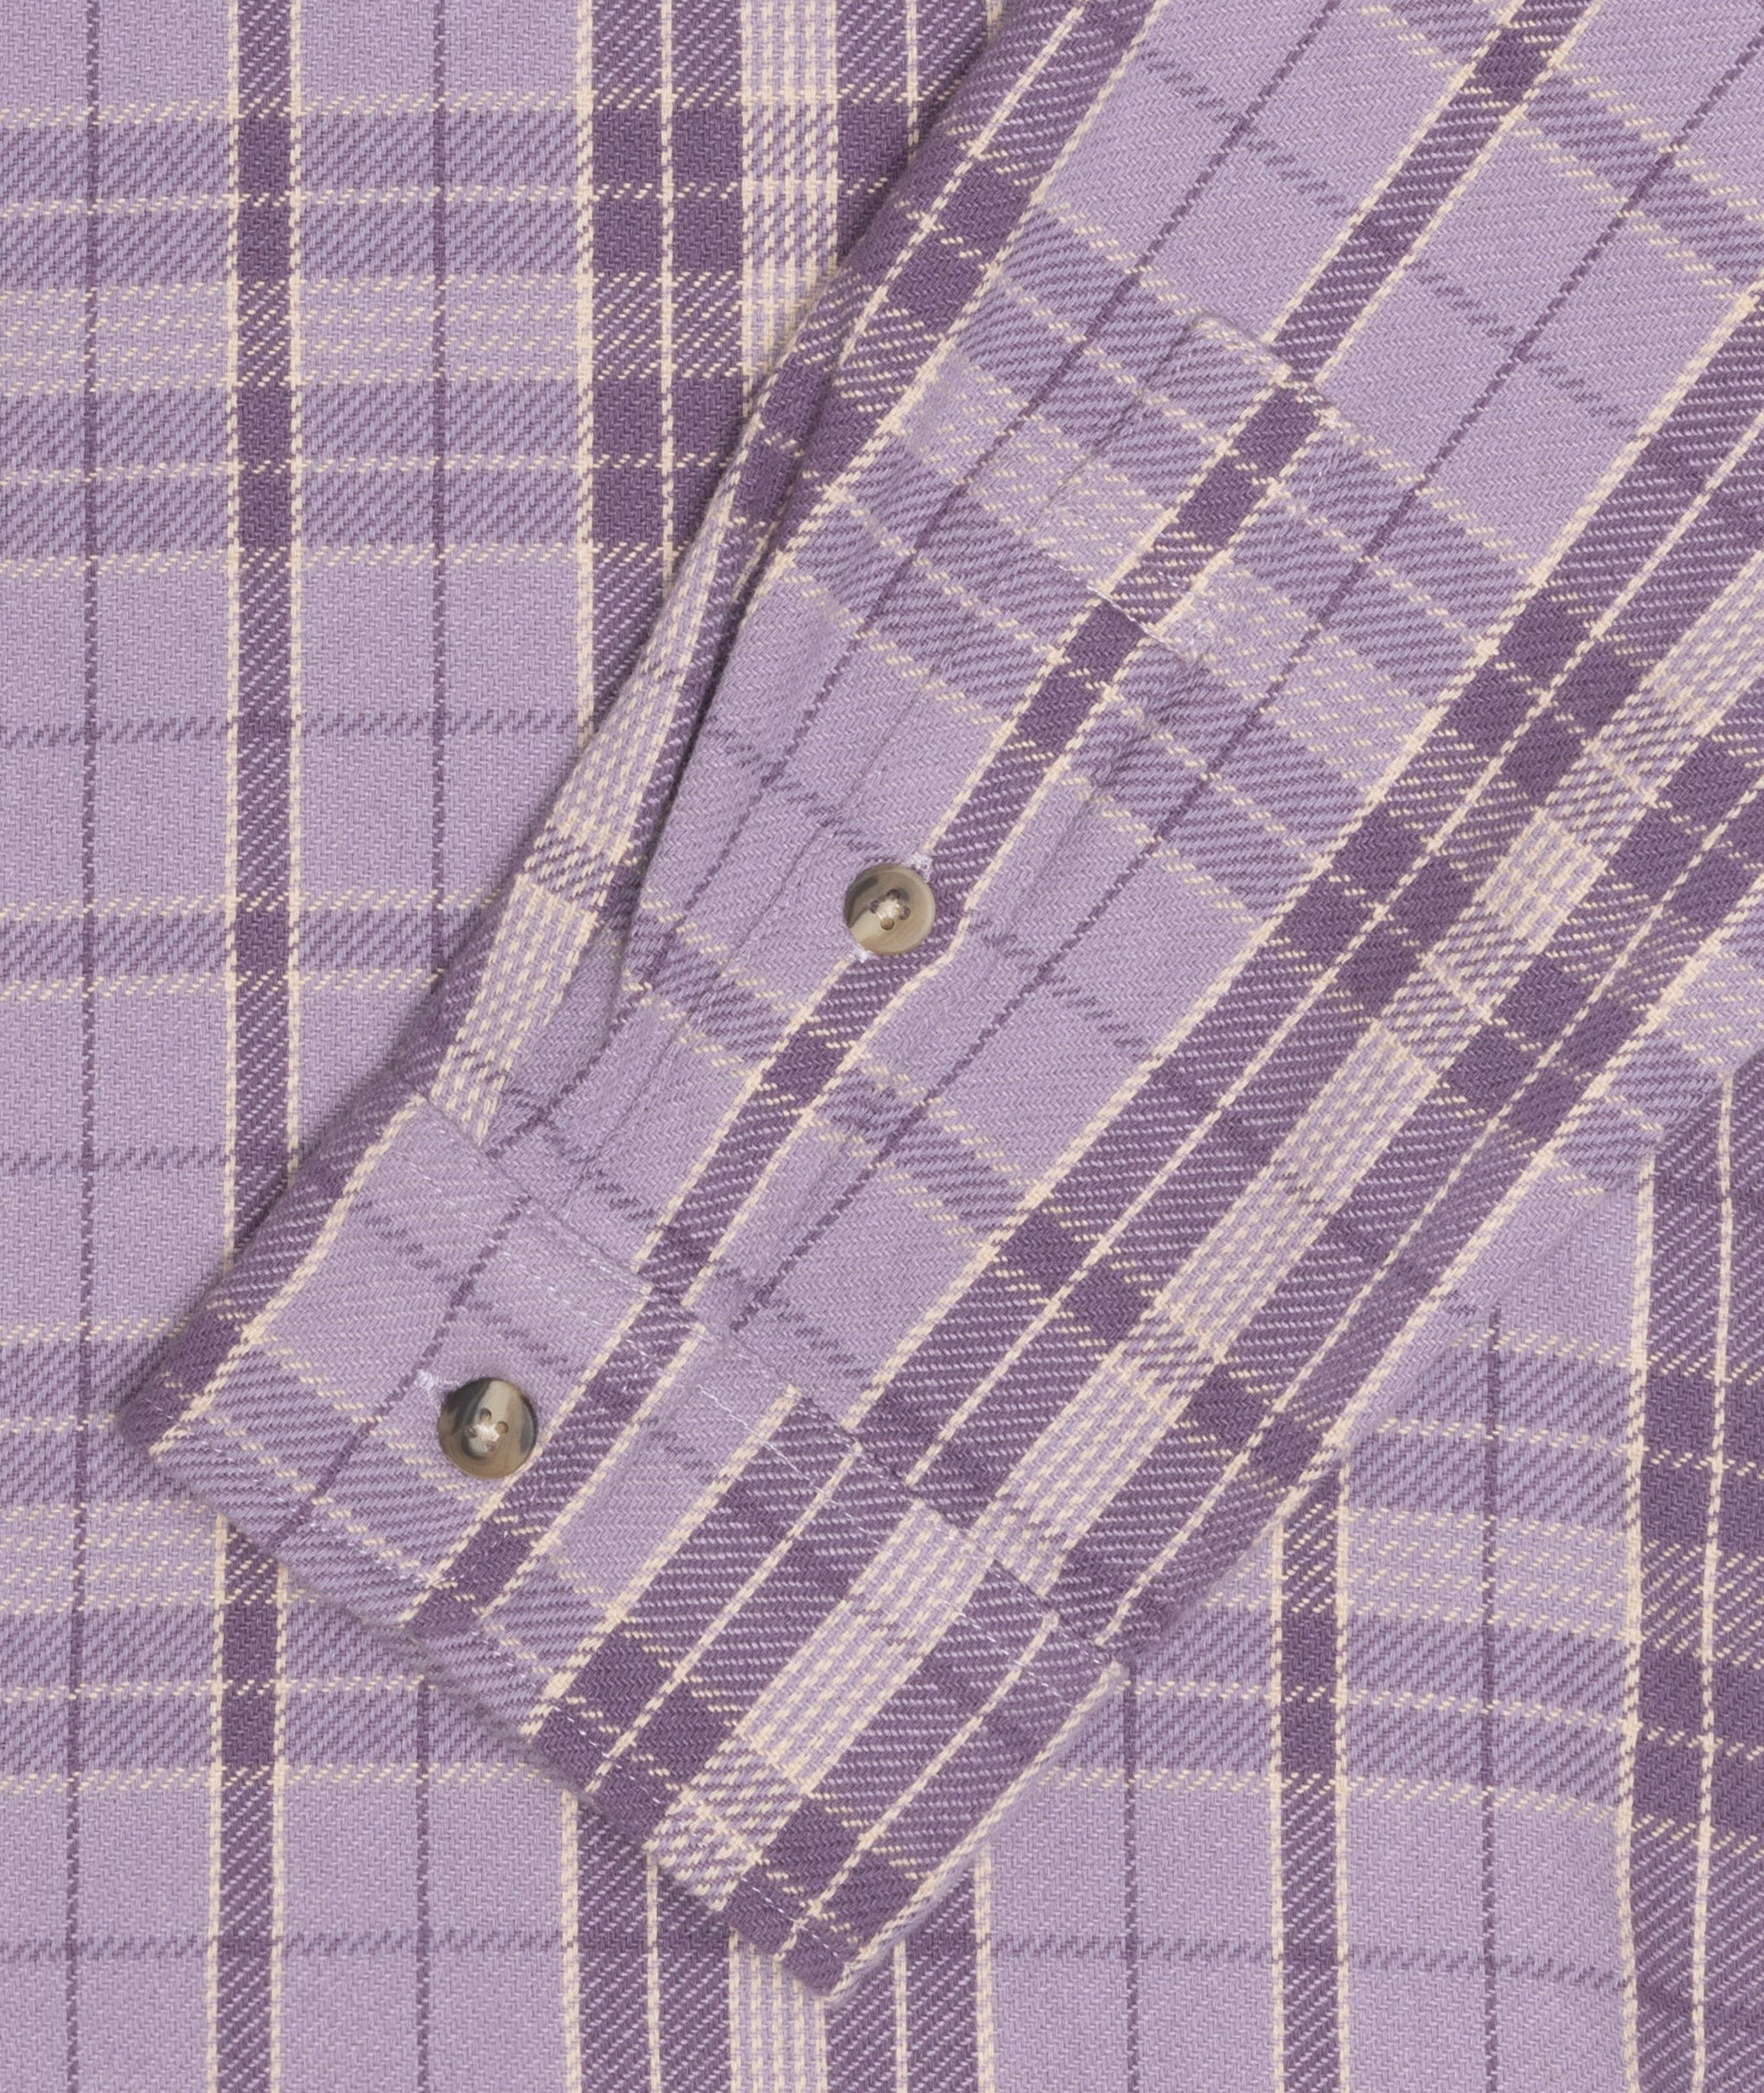 Norse Store | Shipping Worldwide - Stüssy Stones Plaid Shirt - Lavender